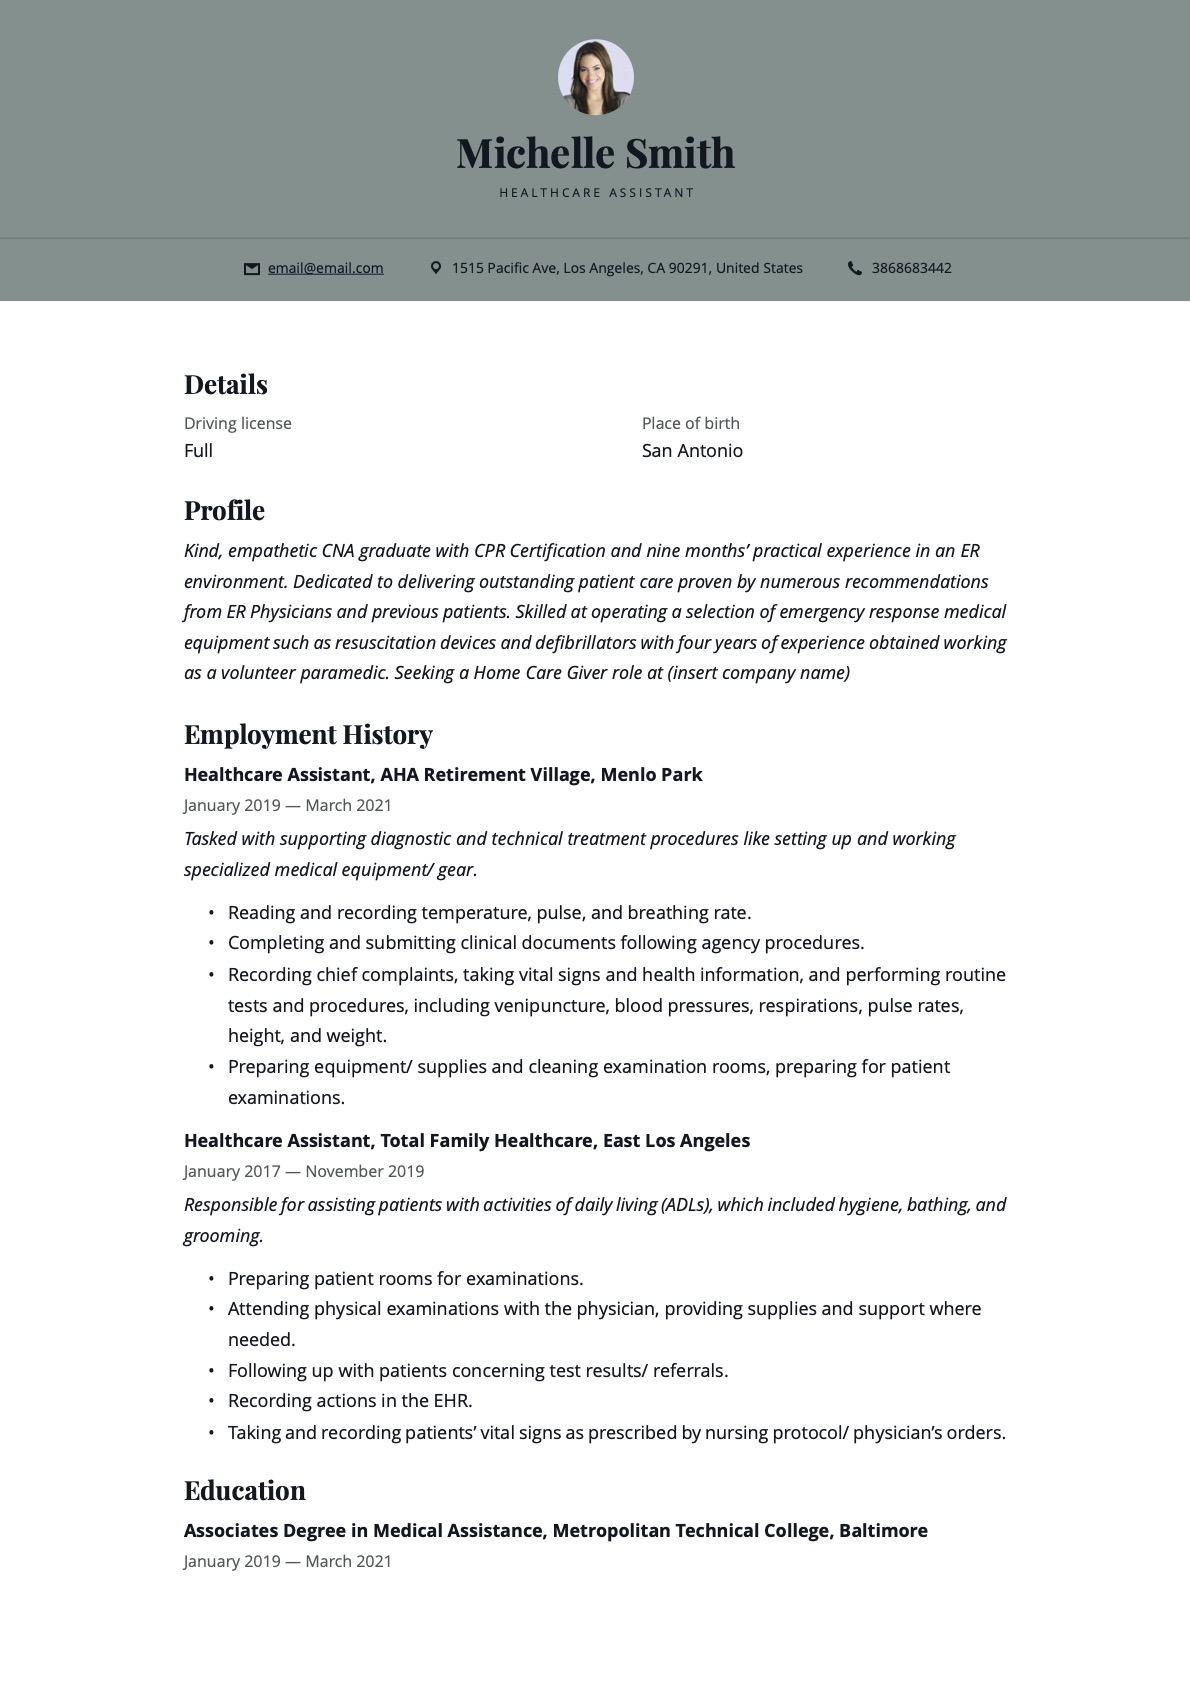 Example Resume Healthcare_Assistant-12